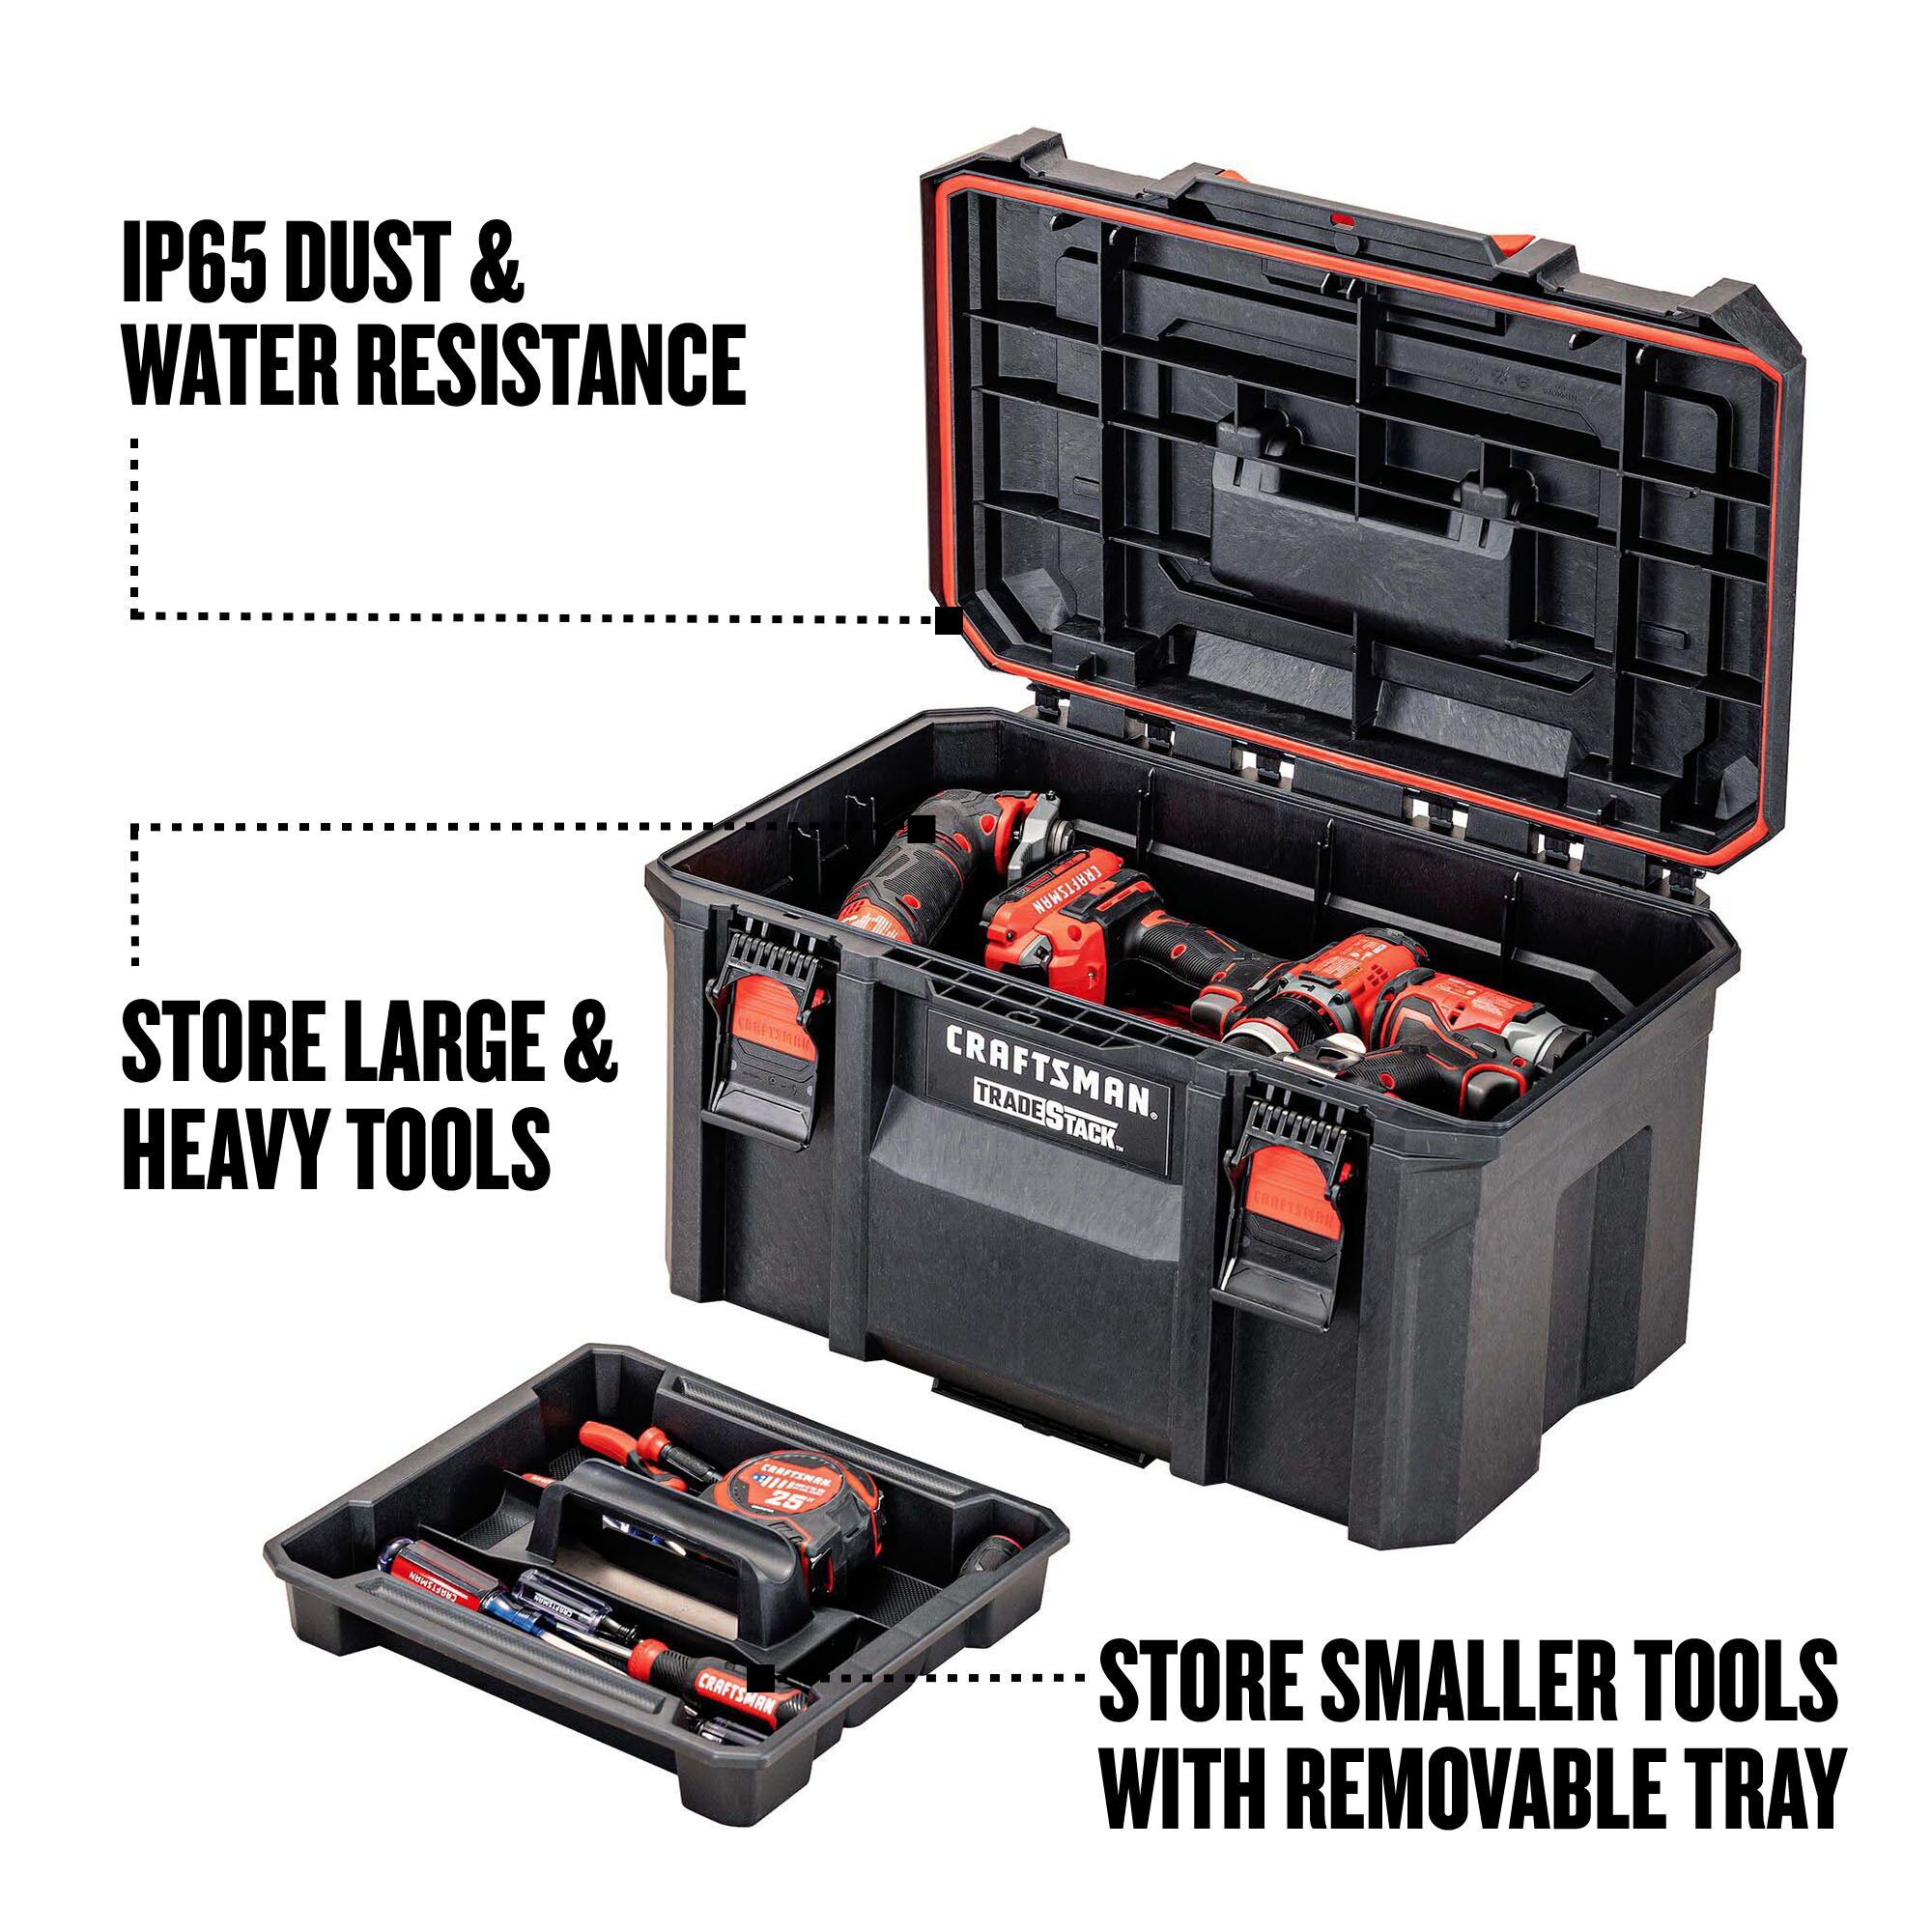 IP65 dust and water resistance, store large and heavy tools, store smaller tools with removable tray